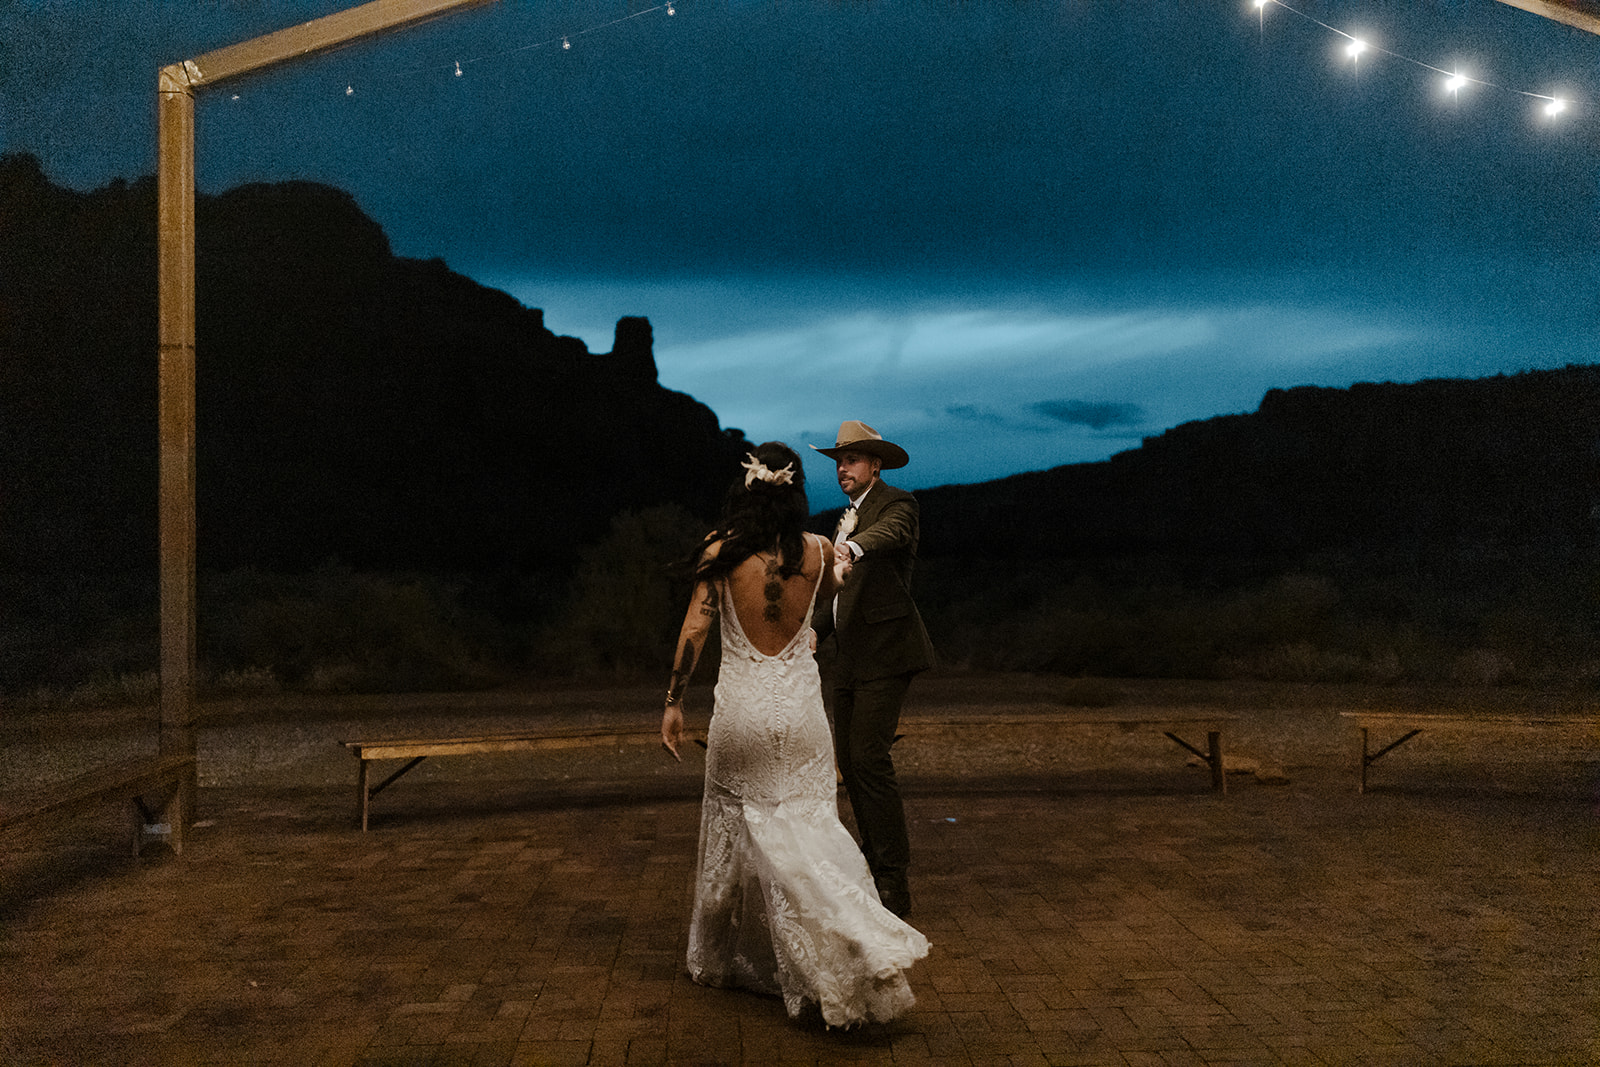 bride and groom share their first dance together with the dreamy Arizona sky in the background